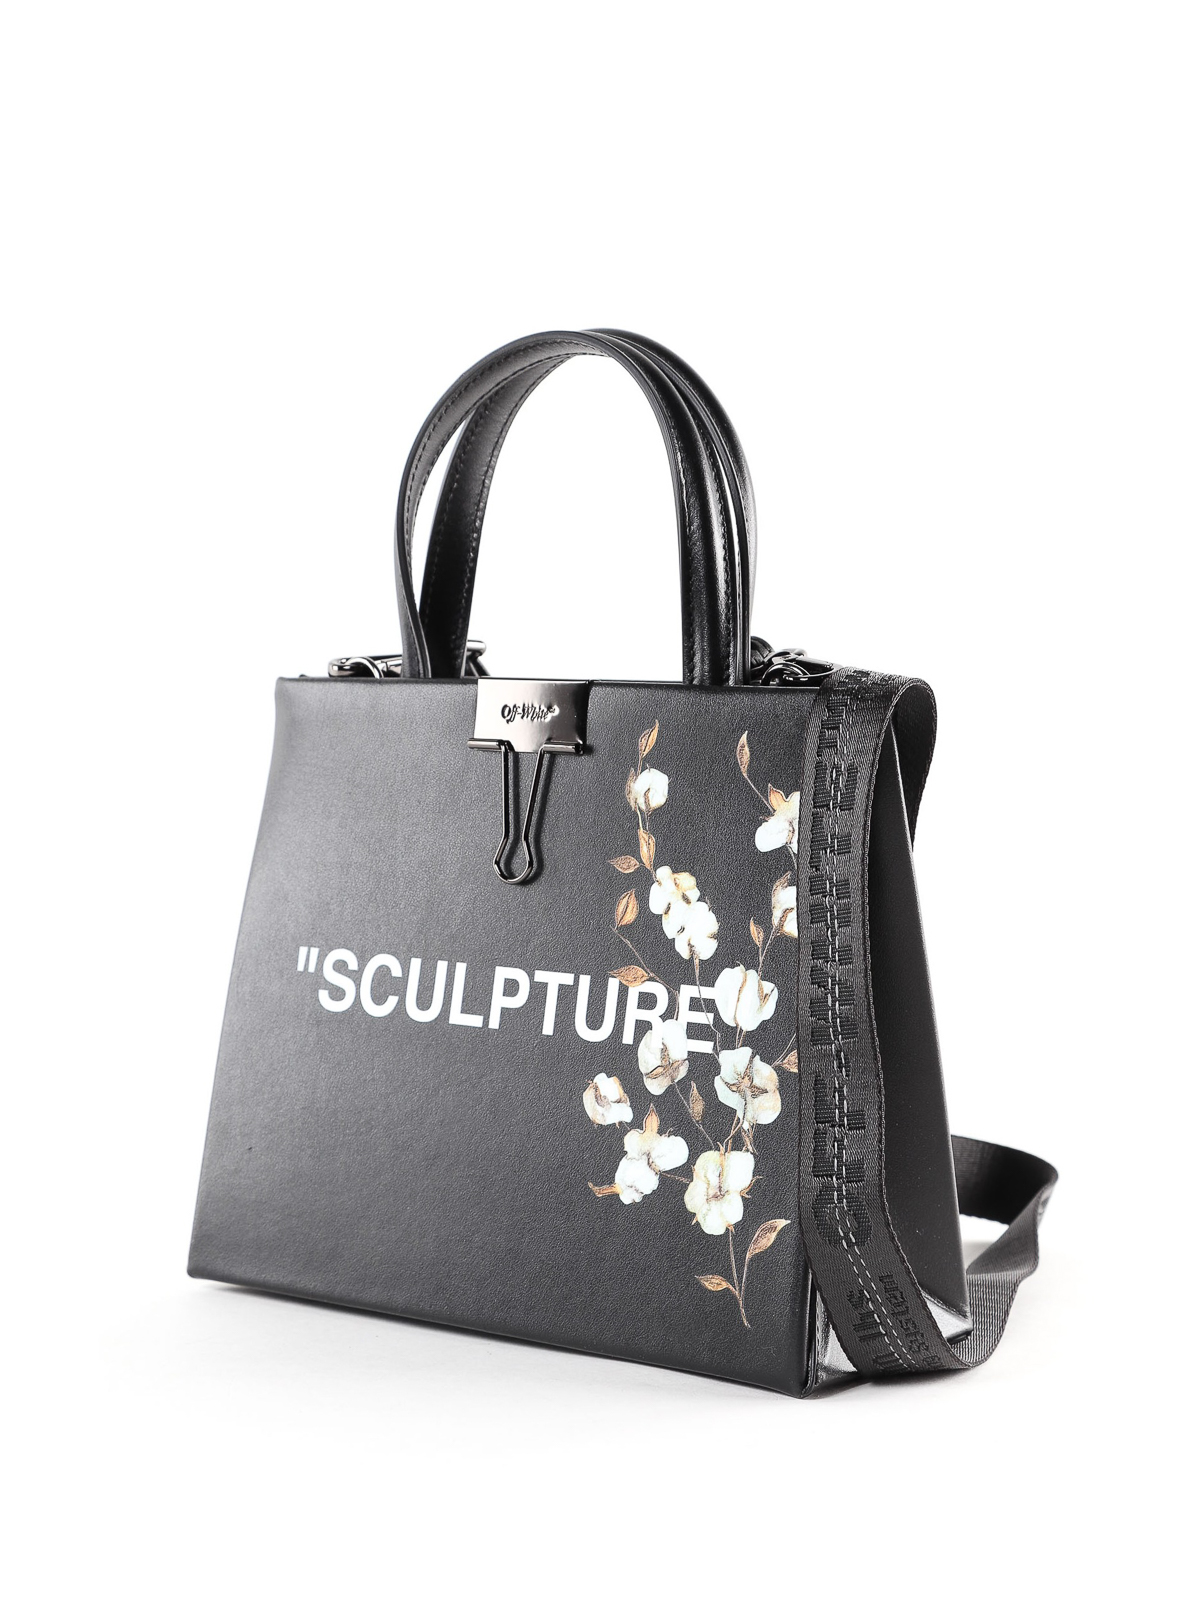 Totes bags Off-White - Sculpture floral print black leather bag -  OWNA059R197790851001